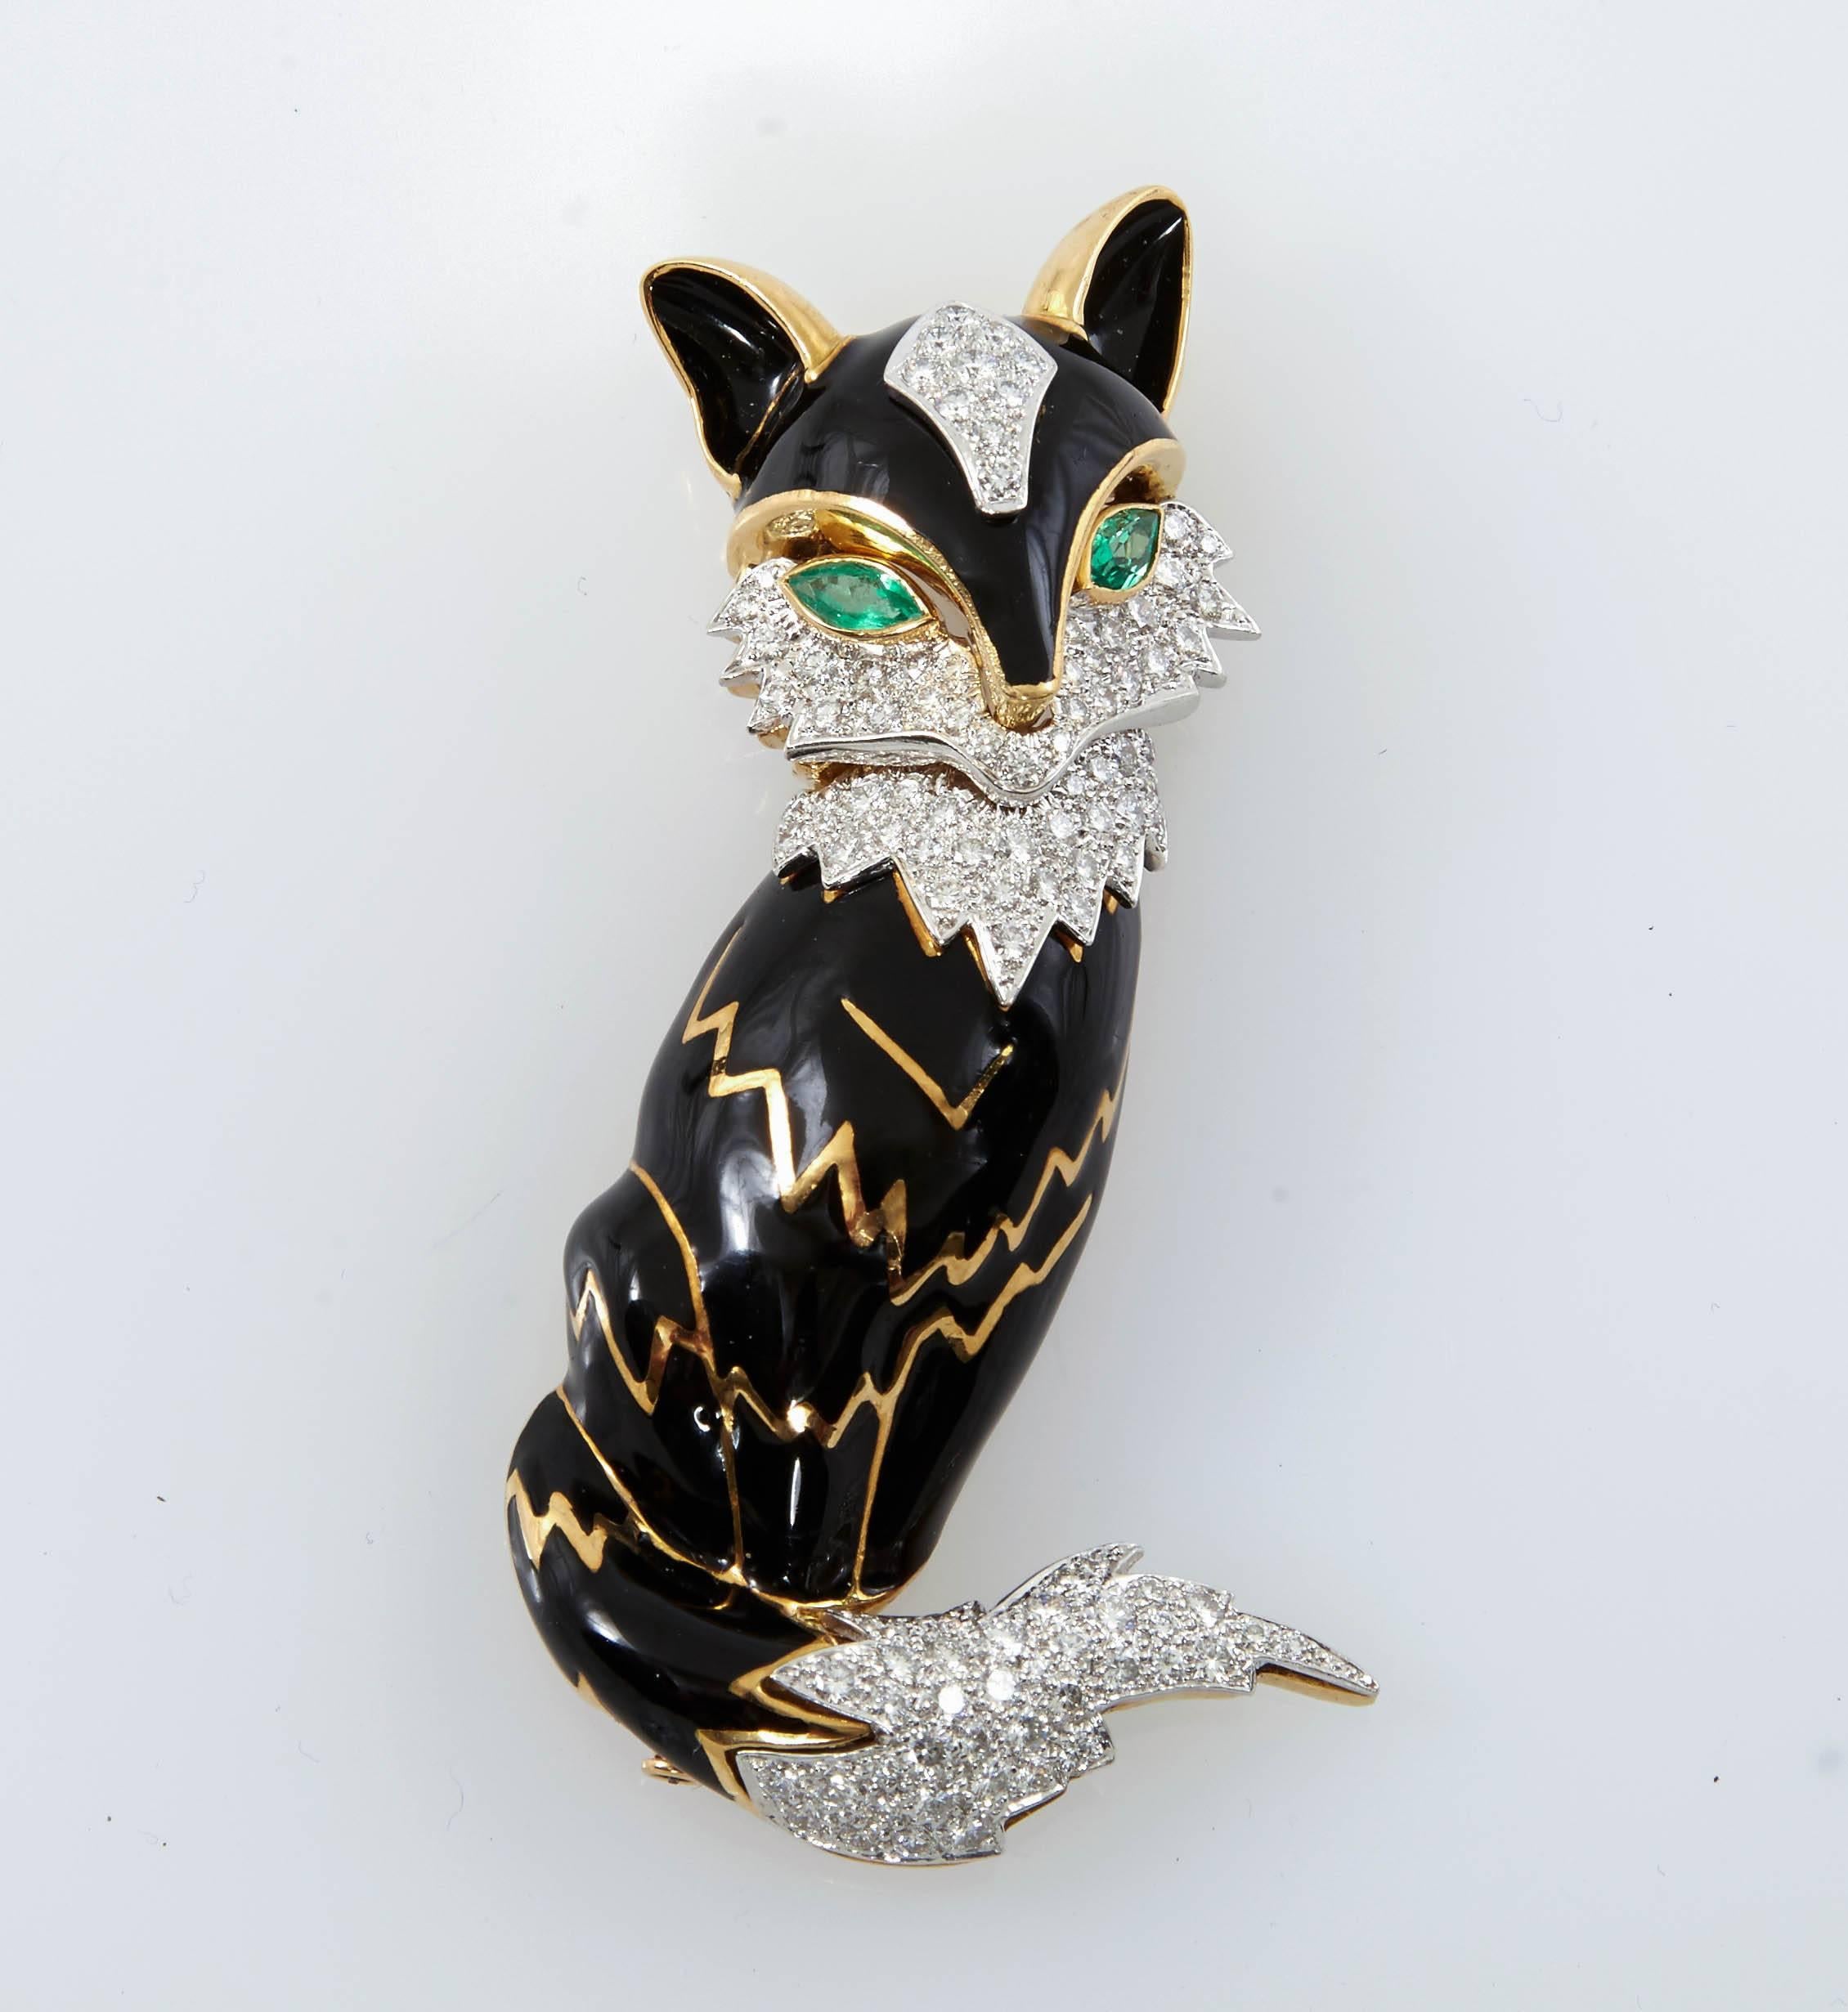 Stunning brooch designed as a black enamel fox, with marquise-cut emerald eyes and circular-cut diamond trim, all finely crafted in platinum and 18k gold. 